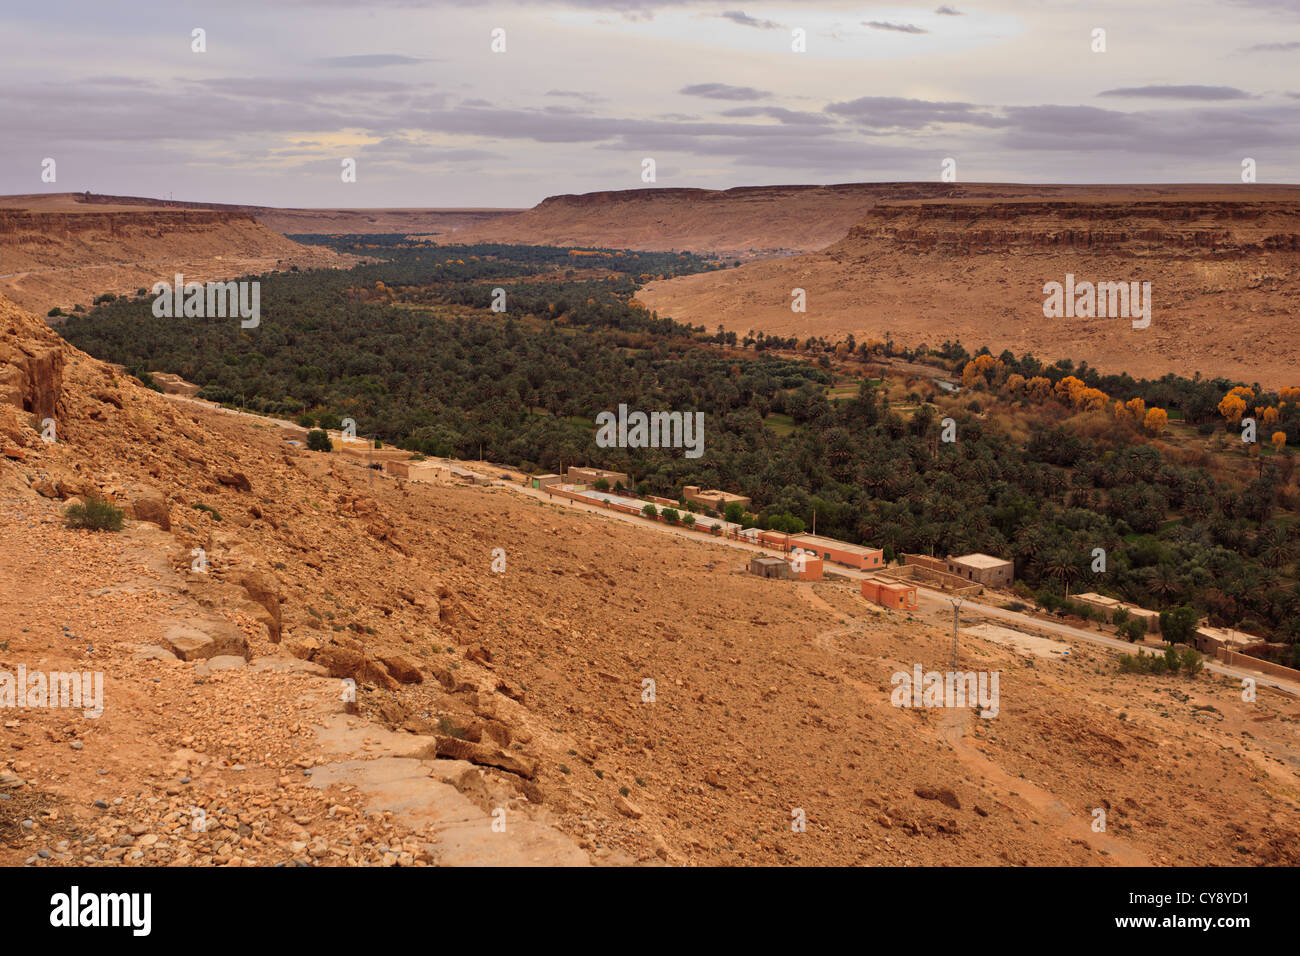 Panoramic view of a fertile valley and oasis in the Saraha Desert, Morocco, Africa Stock Photo